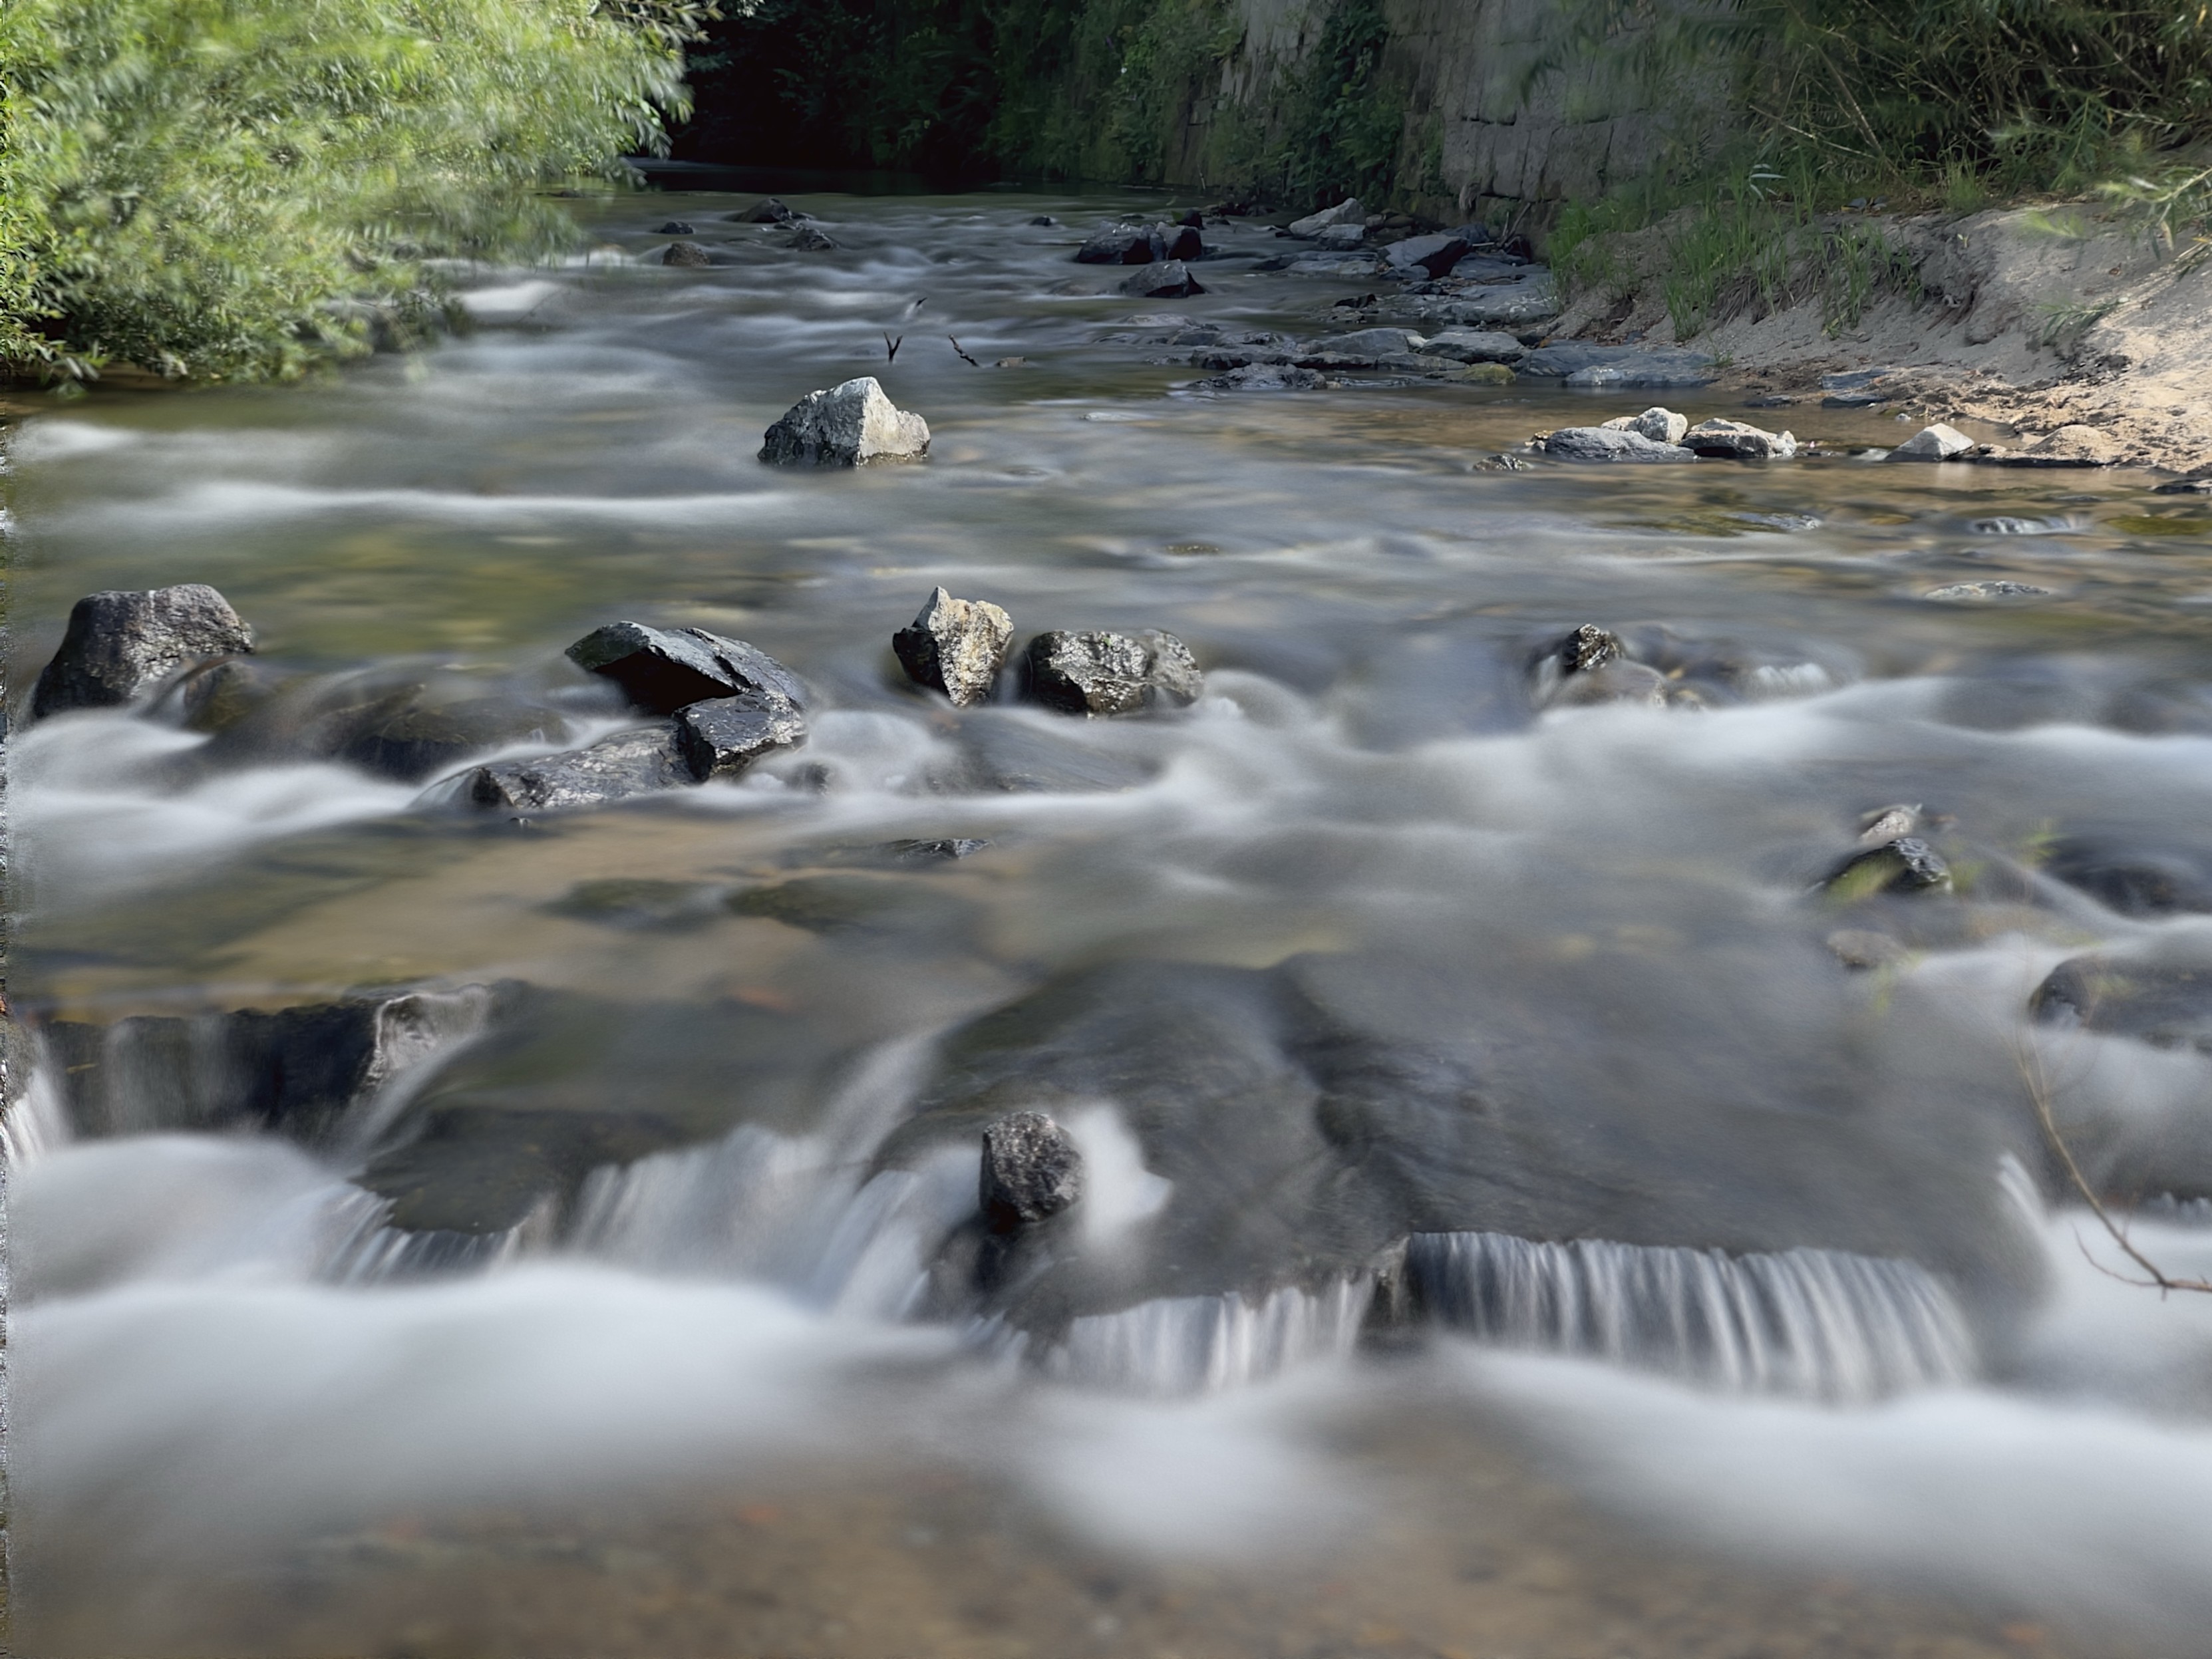 A serene stream with gently flowing water over rocks, surrounded by lush greenery.